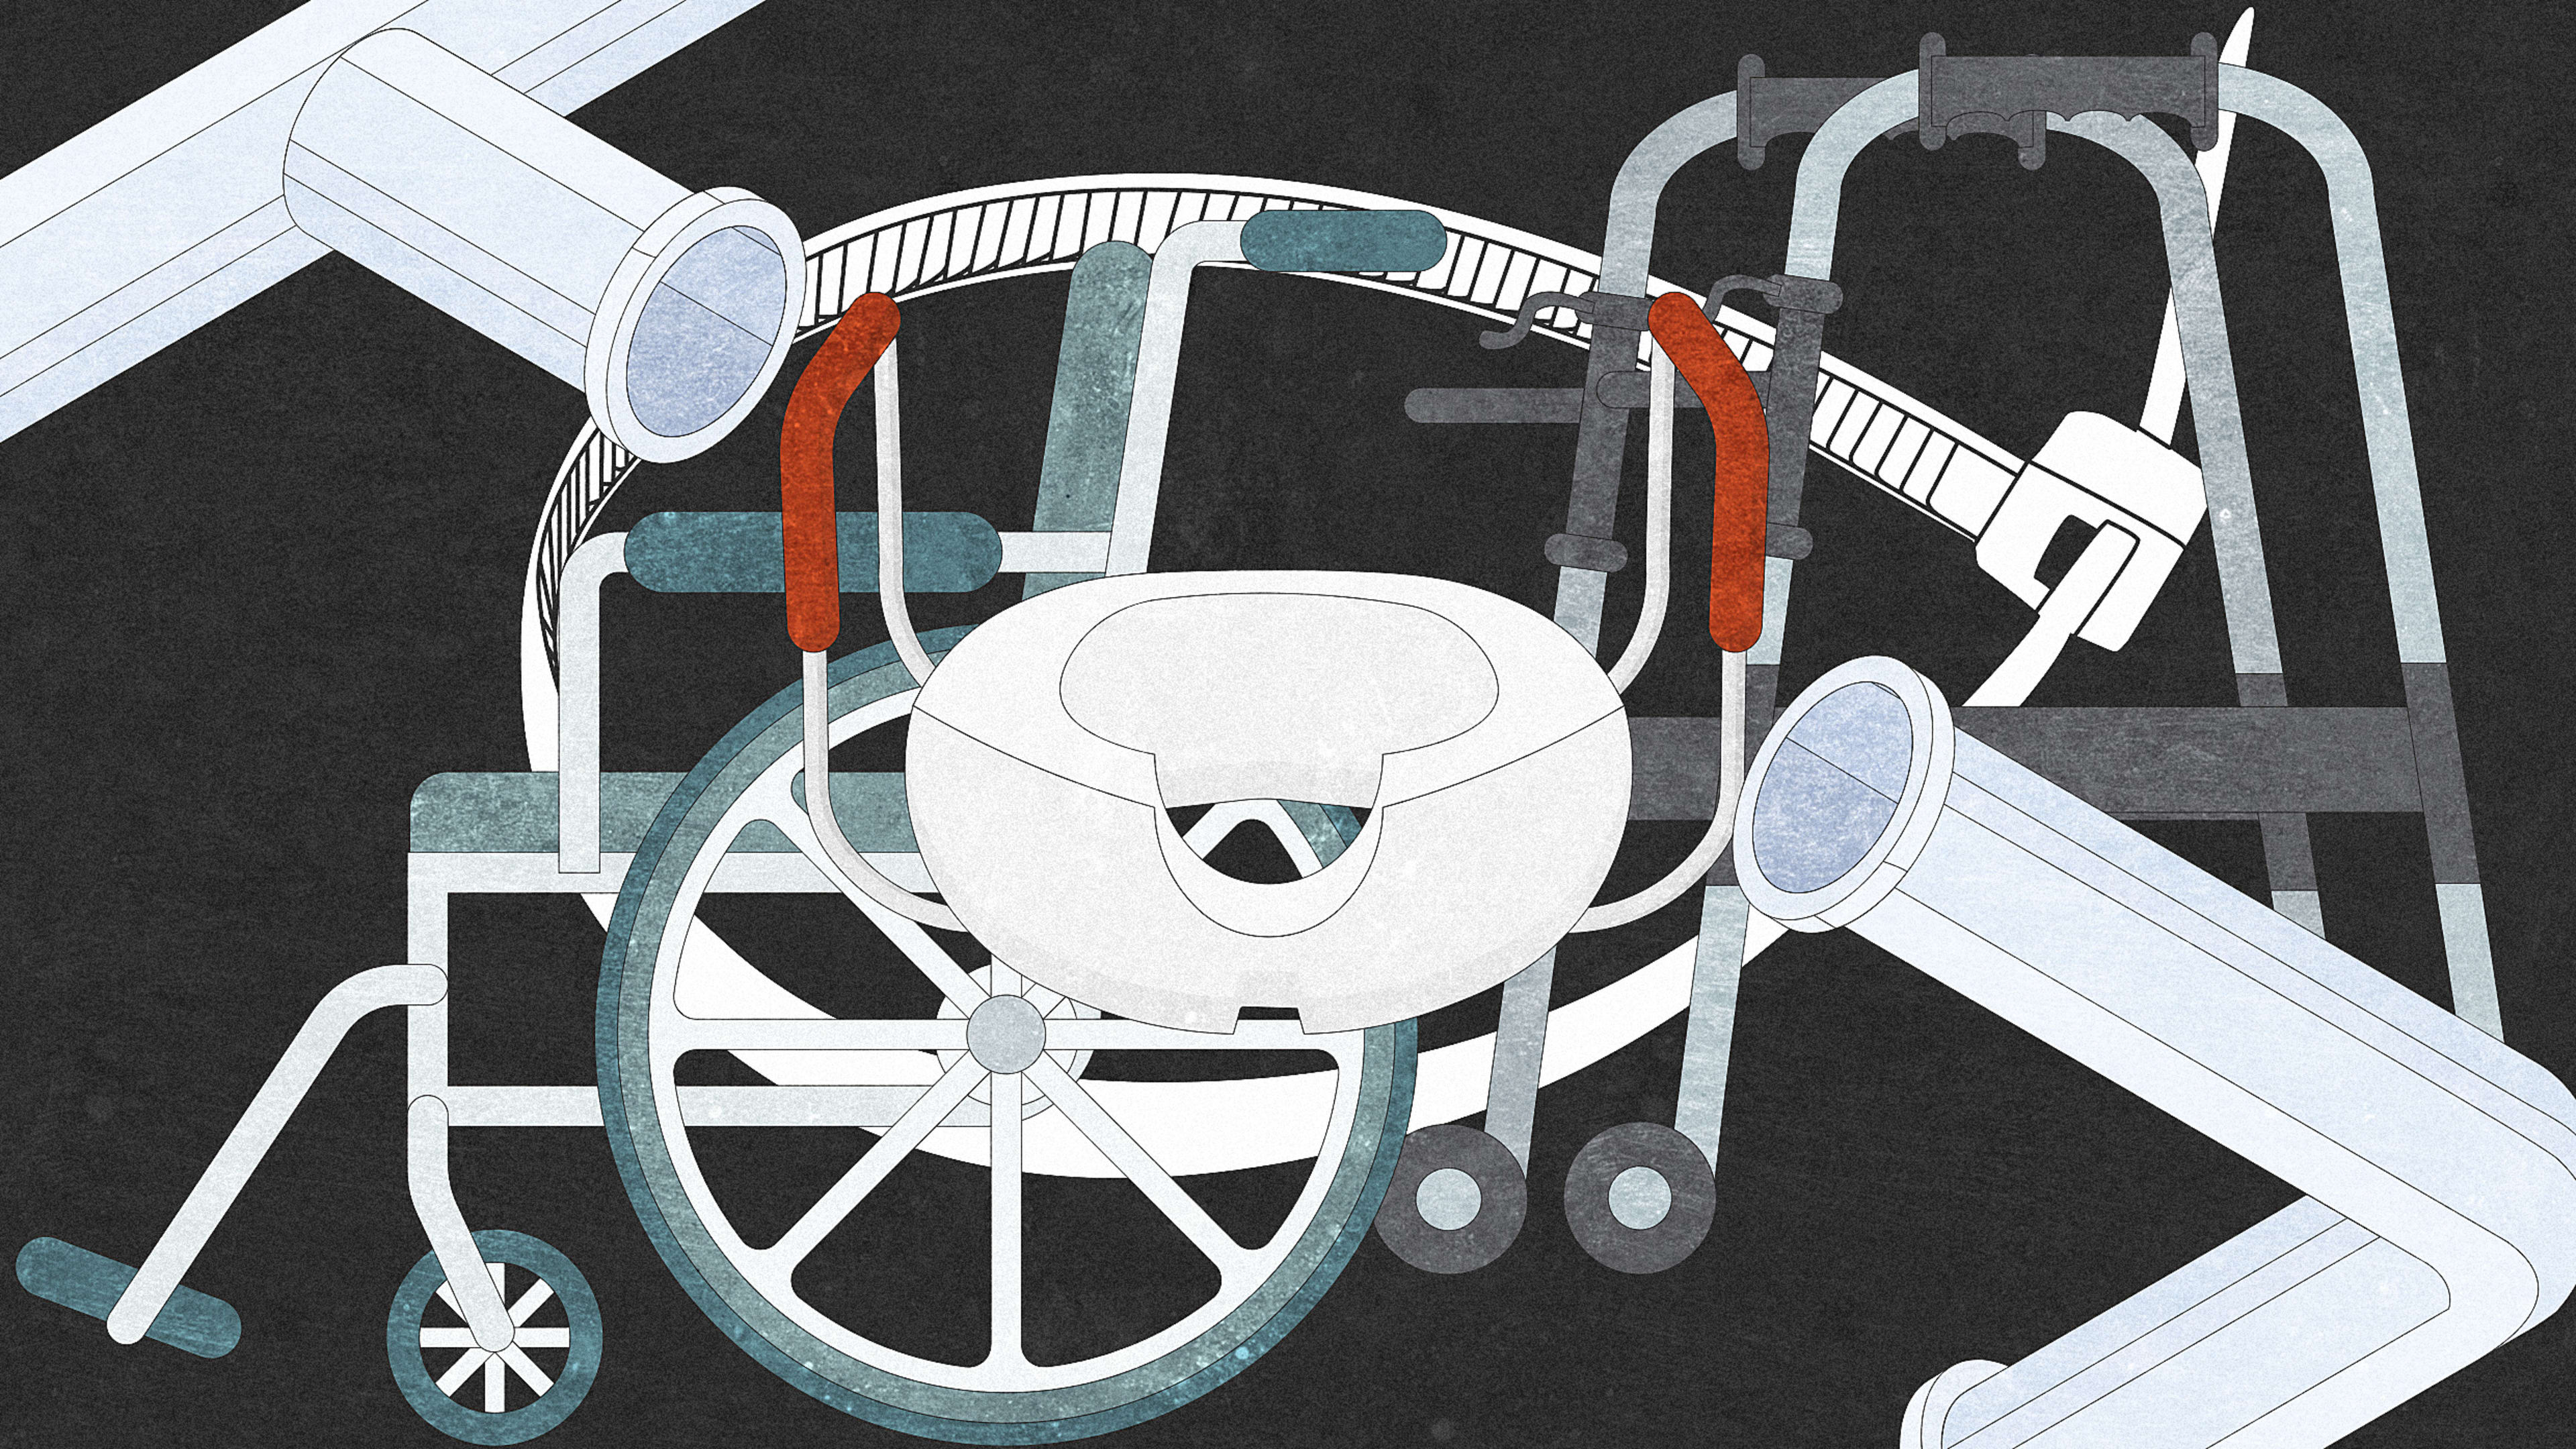 Zip ties, plywood, and PVC tubes: how disabled people and caregivers are hacking their homes